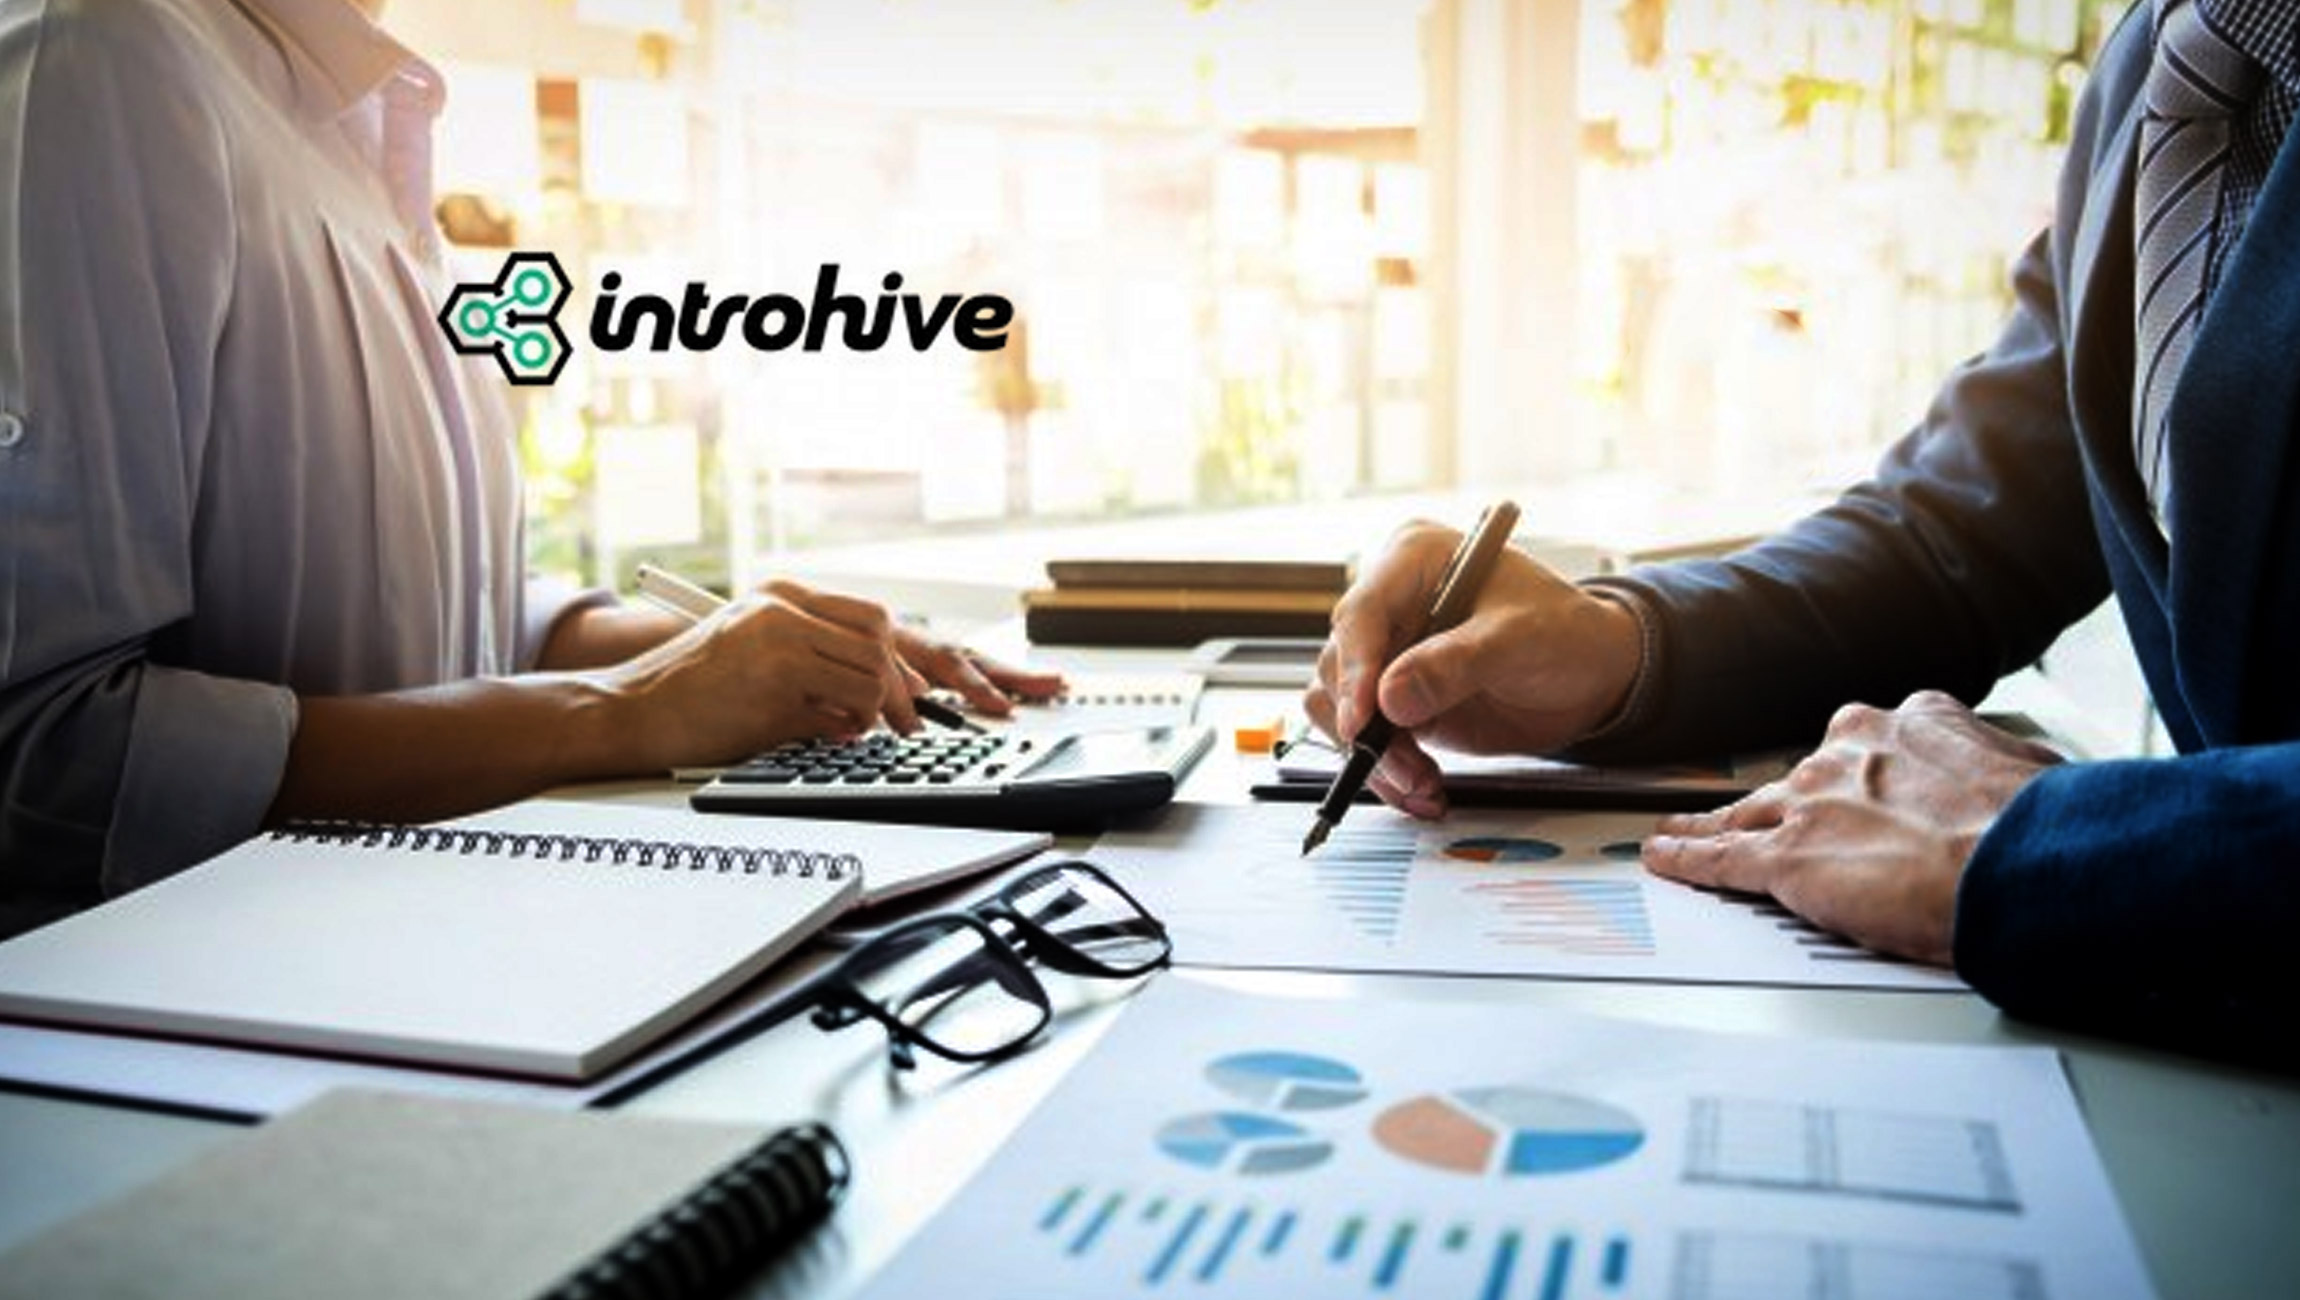 Introhive-Ranked-272-On-Deloitte's-2021-Technology-Fast-500b__-For-North-America